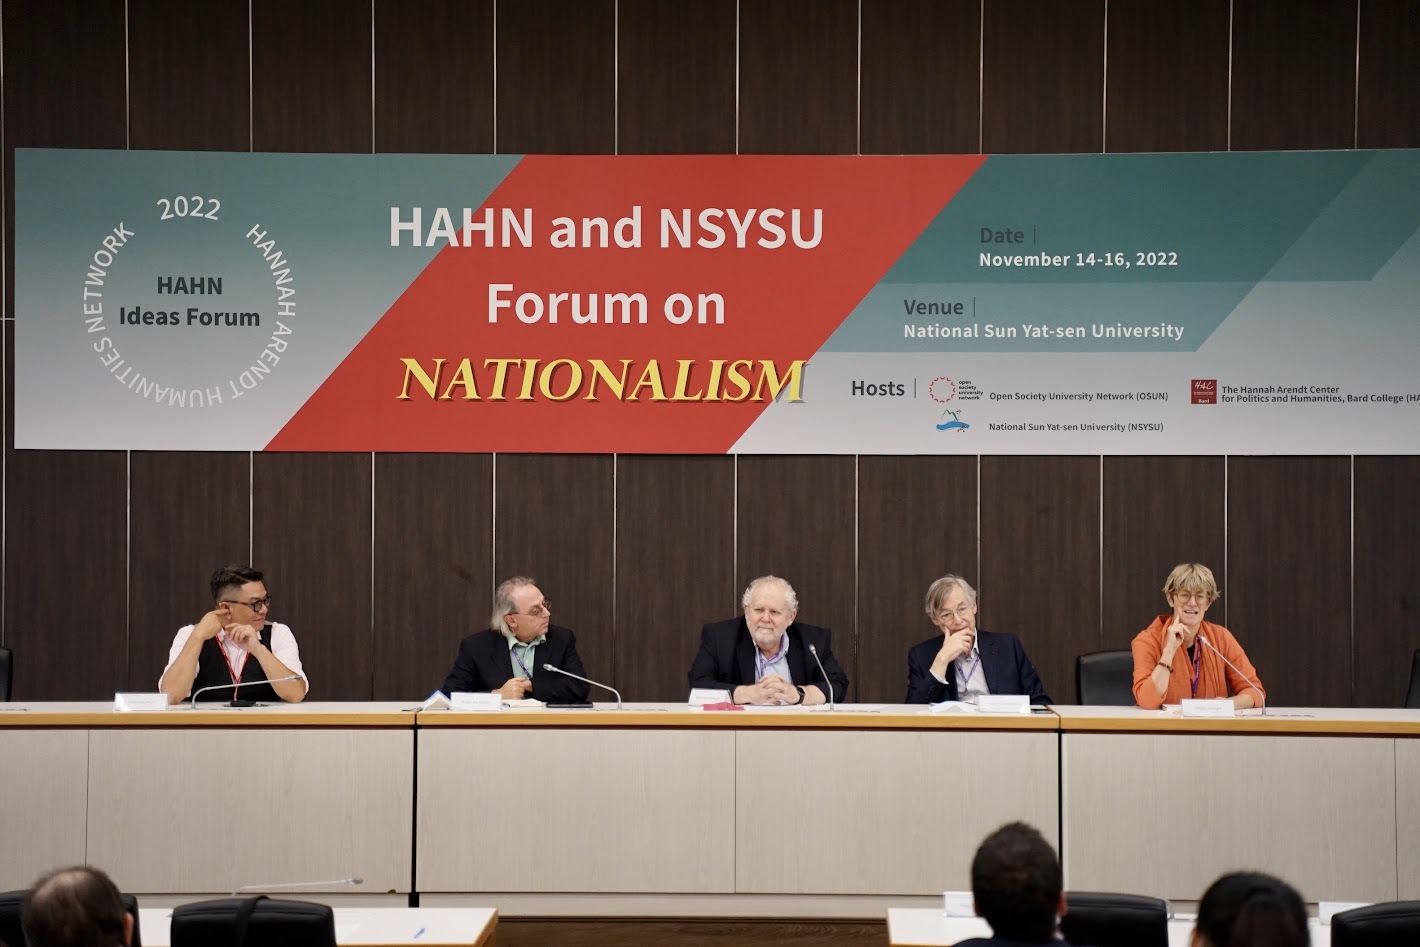 International Scholars and Experts Gather in NSYSU for HAHN Ideas Forum to Discuss Nationalism around the World